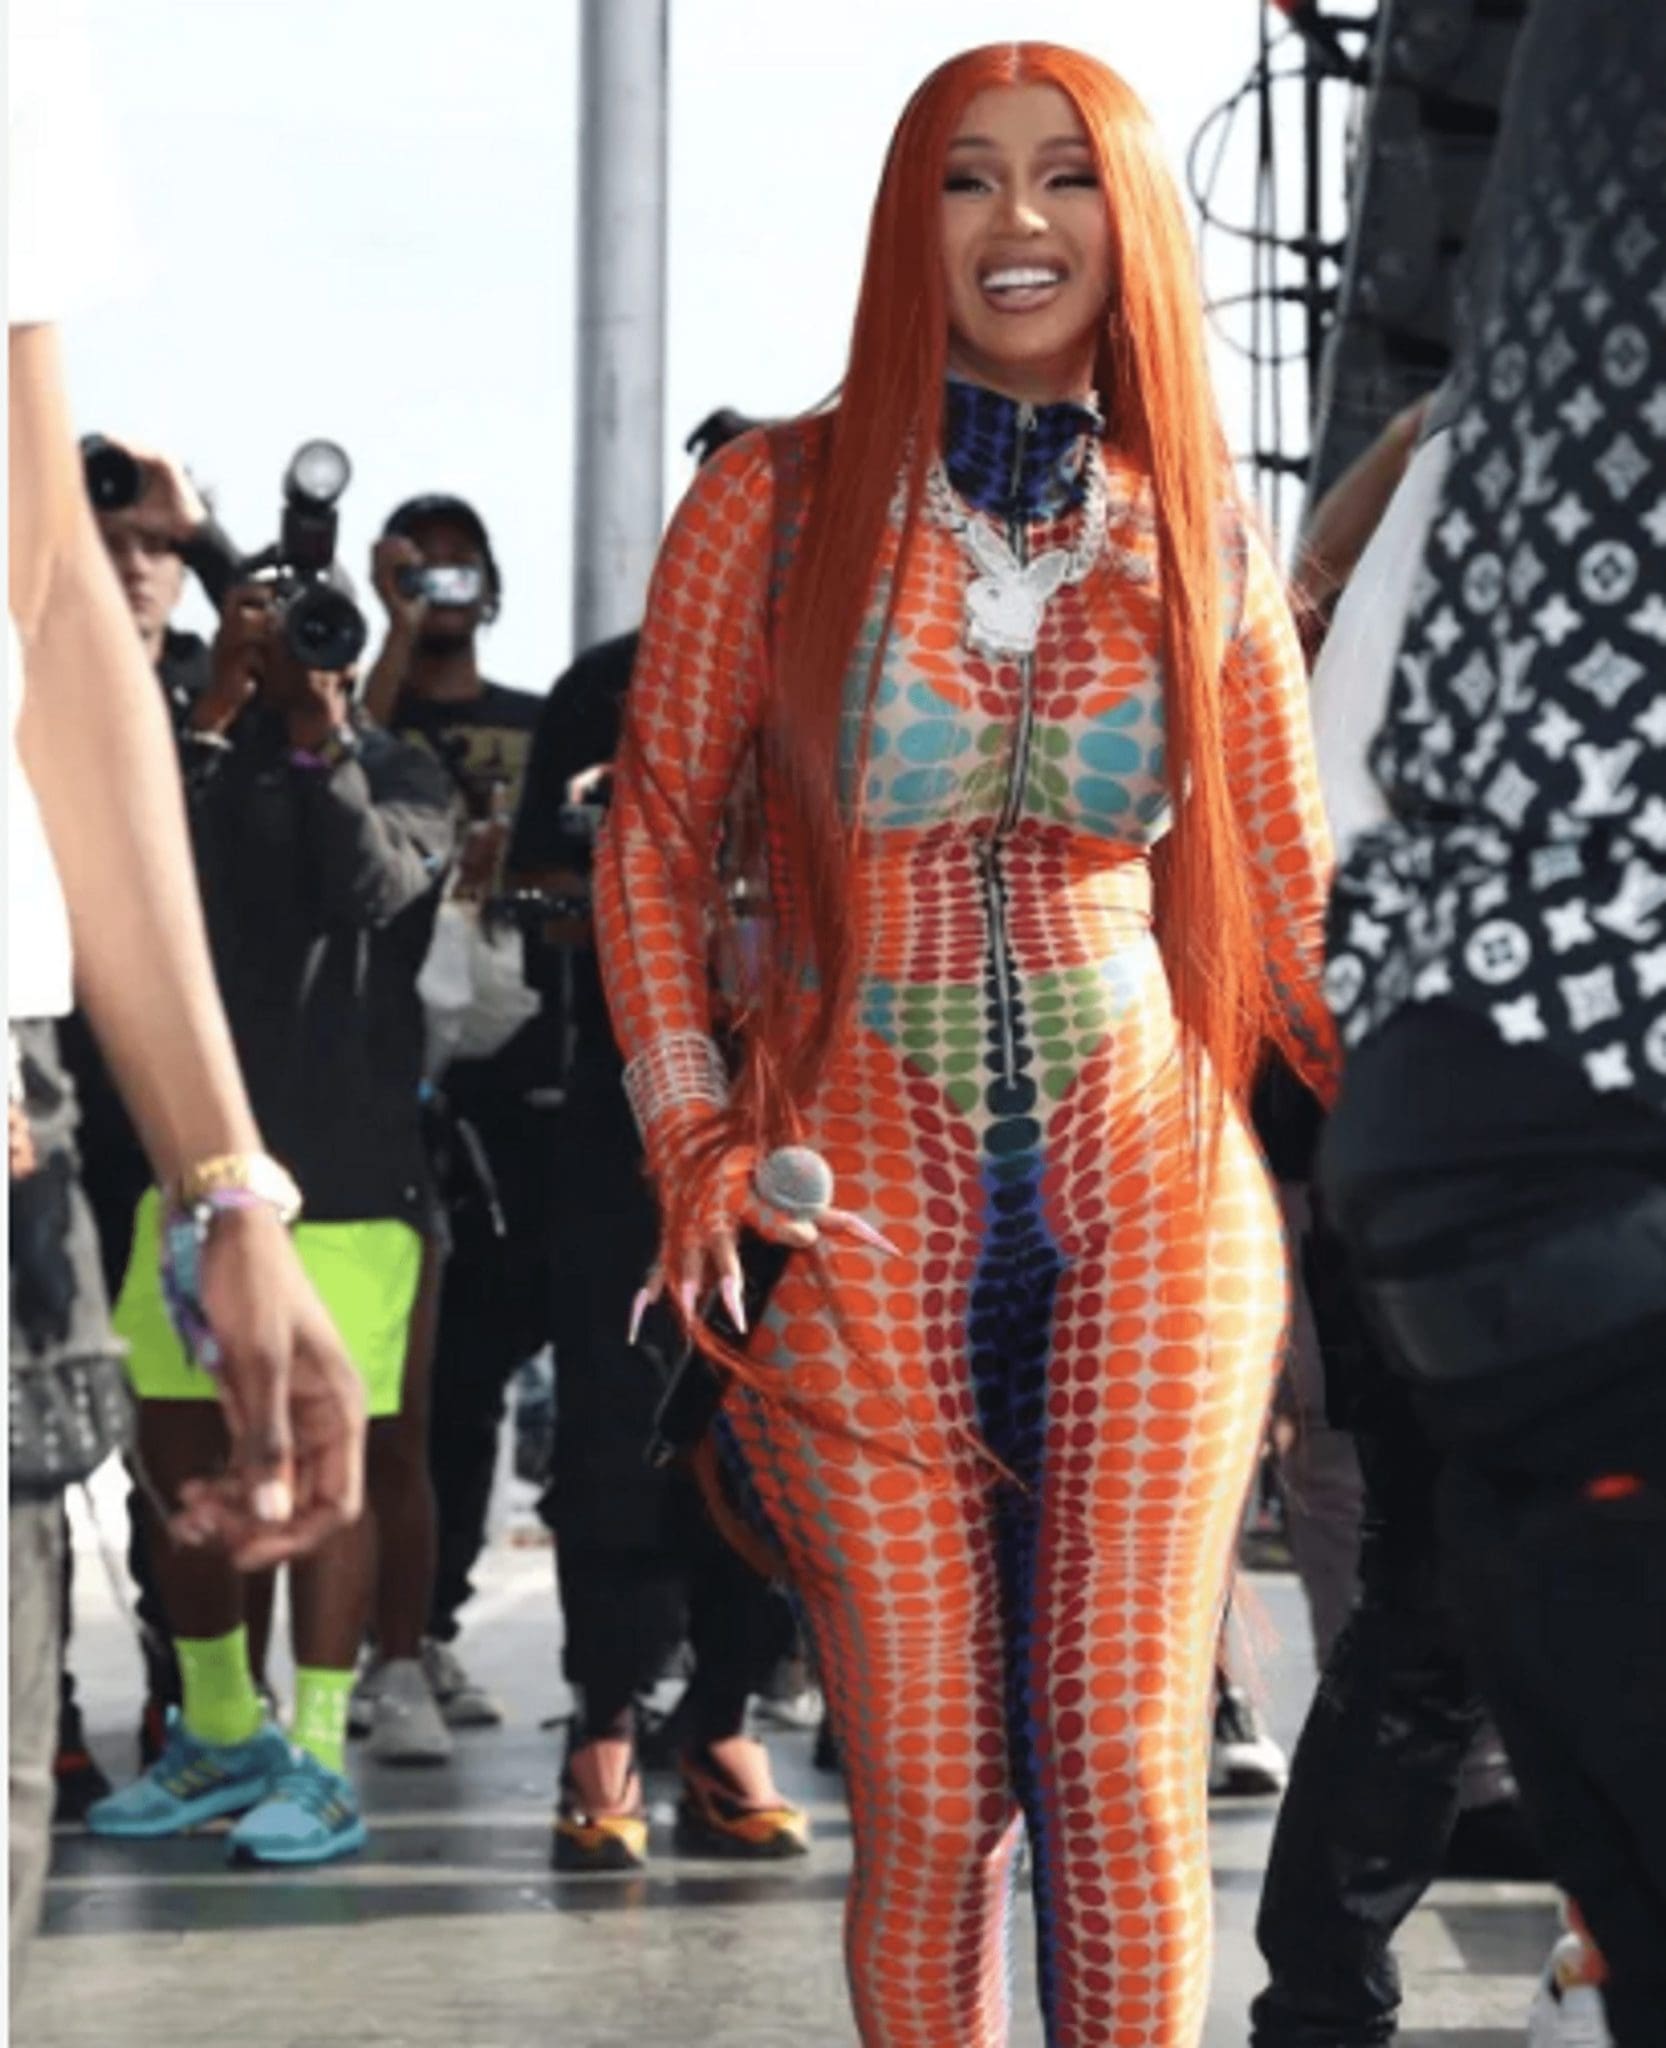 Cardi B chose a revealing jumpsuit from the most famous Jean Paul Gaultier collection for the performance